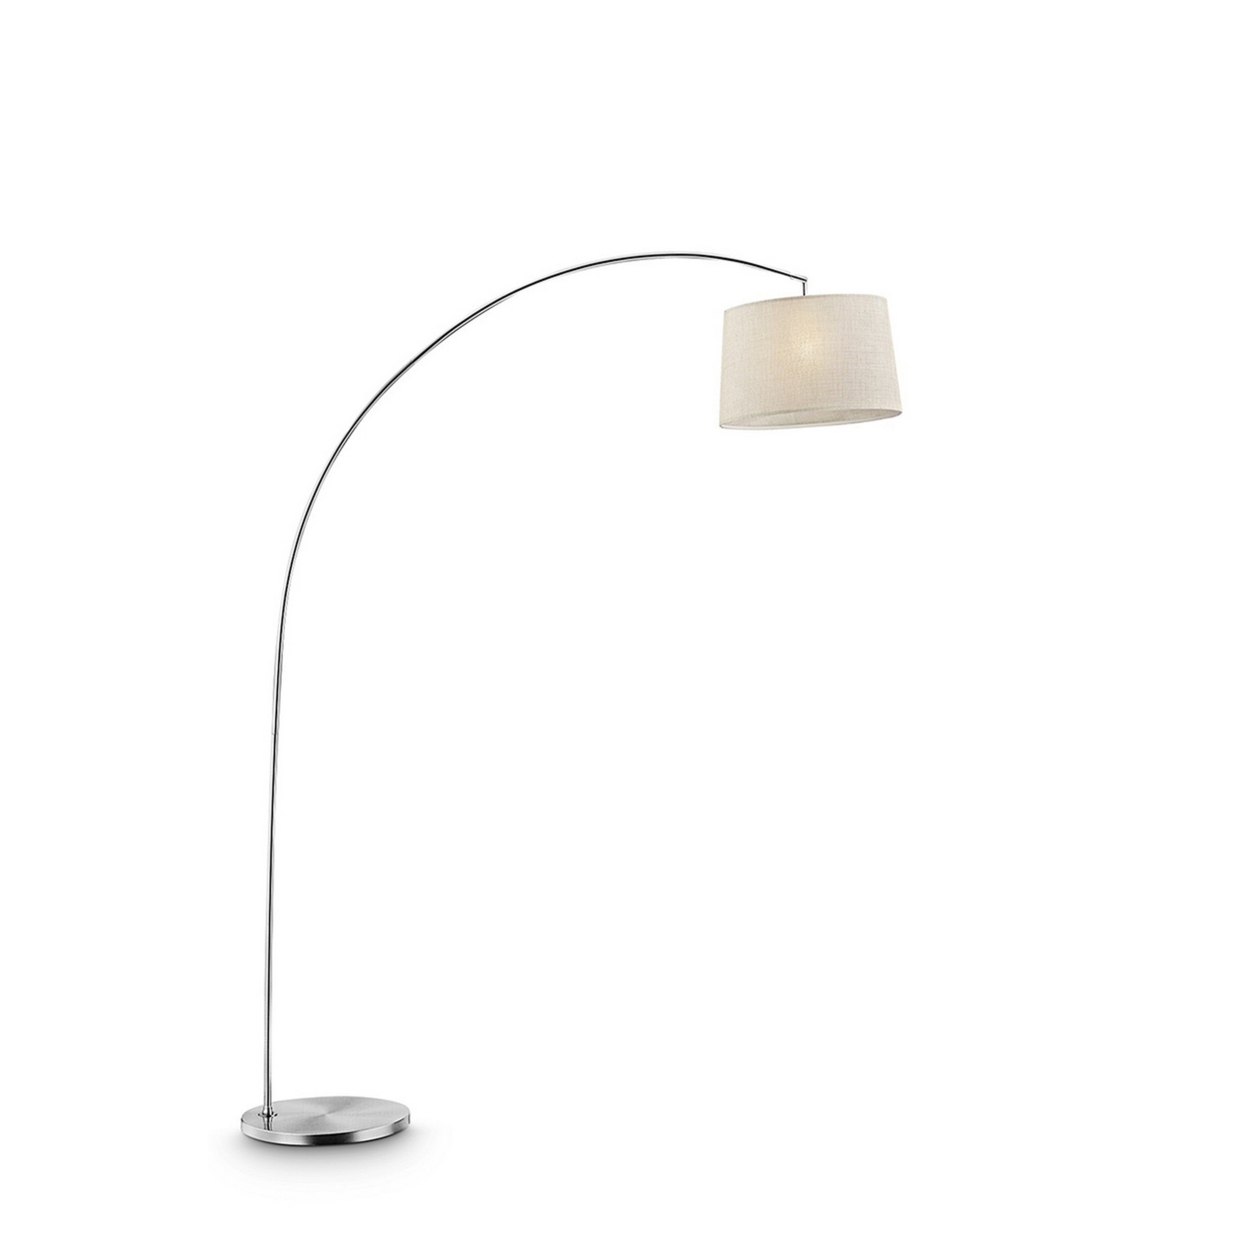 Floor Lamp With Arched Metal Body, Silver And Beige- Saltoro Sherpi